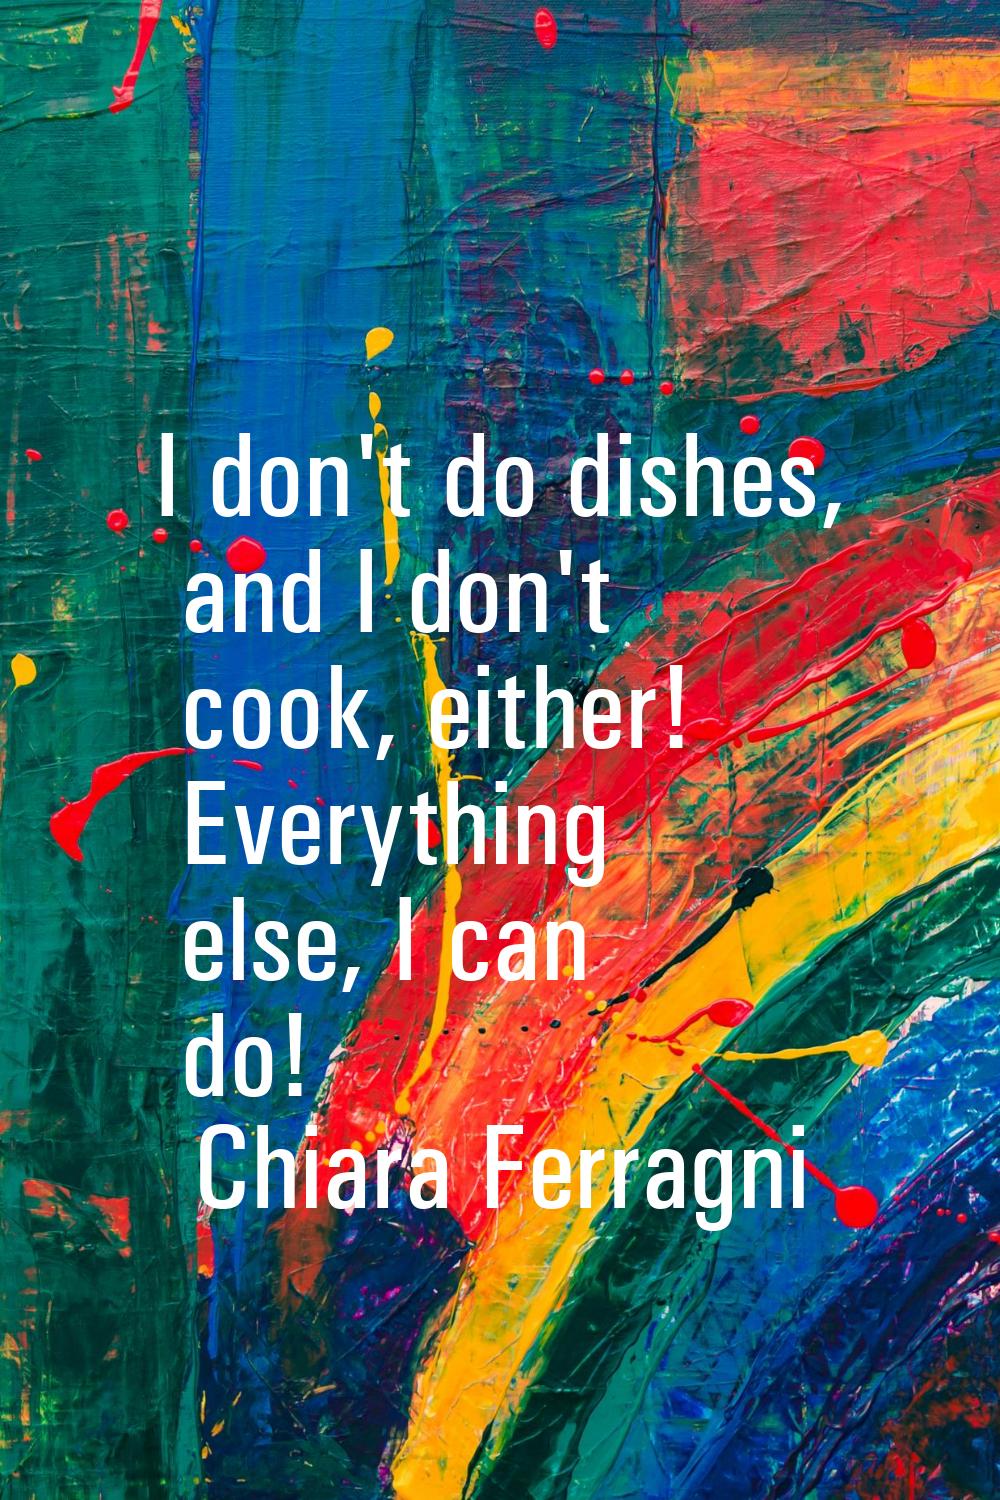 I don't do dishes, and I don't cook, either! Everything else, I can do!